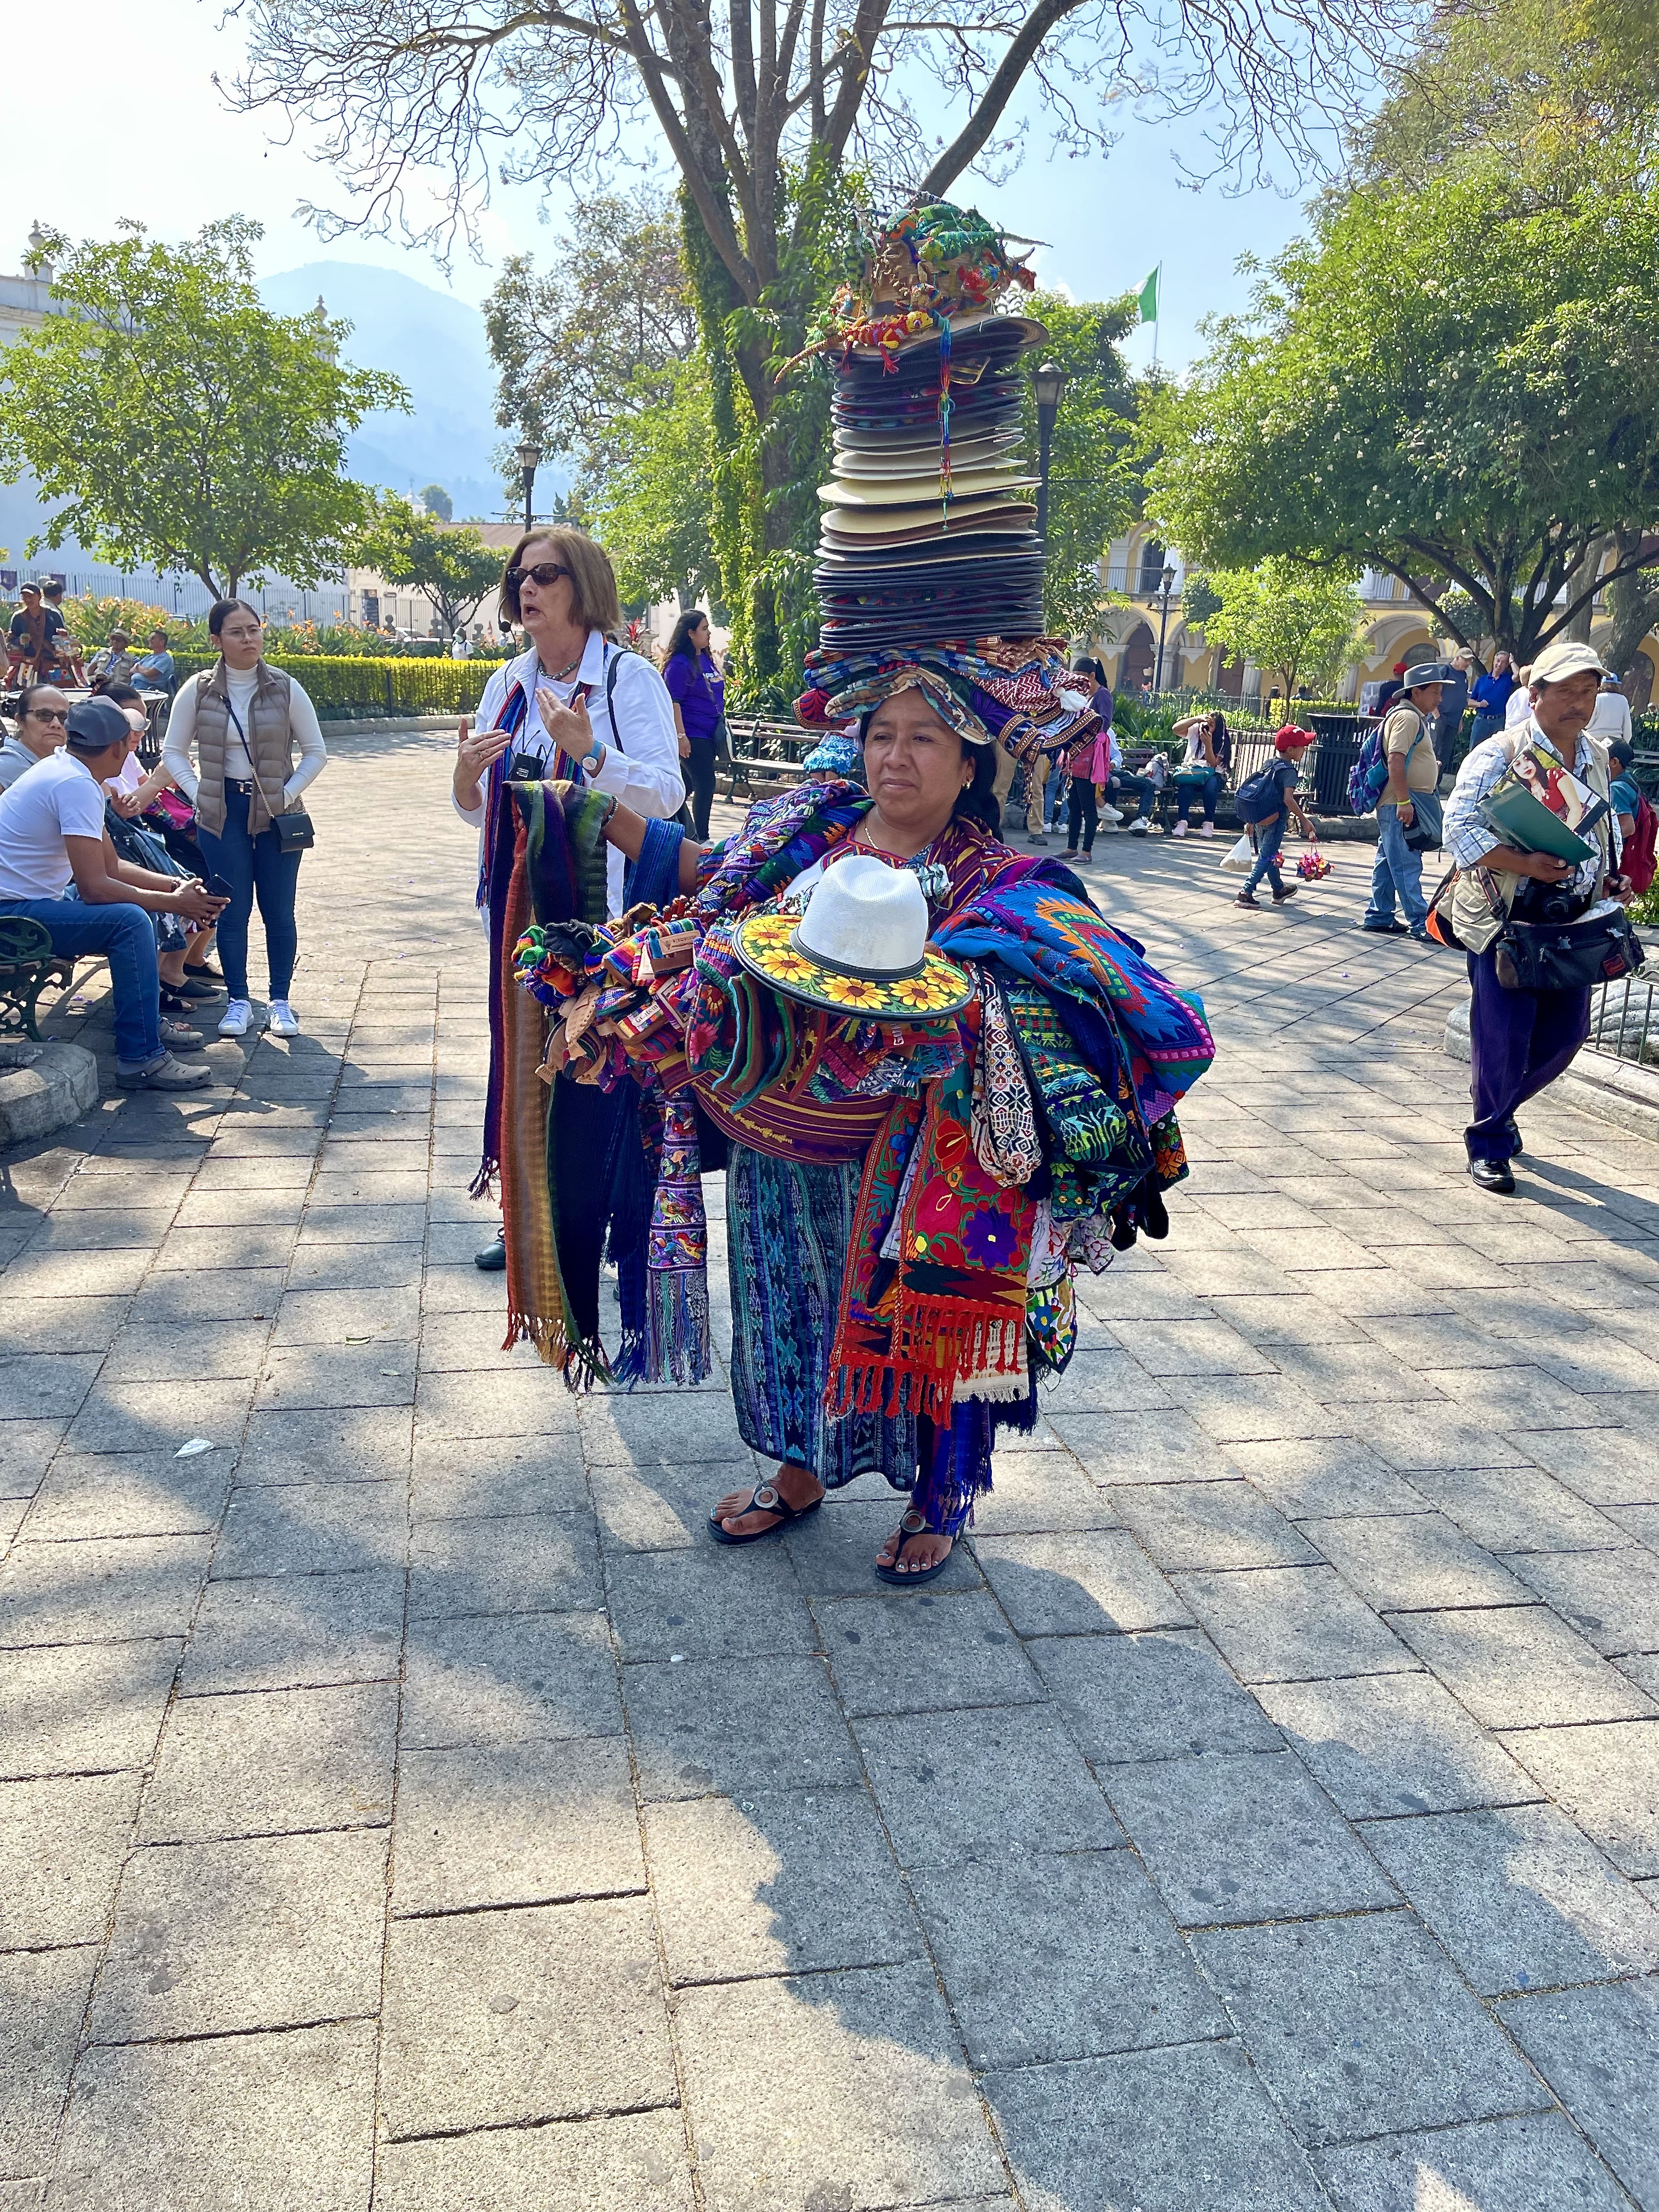 Maya woman in Parque Central selling hats and clothes. The hat stack can weigh up to 50 pounds.
ANNE SURCHIN